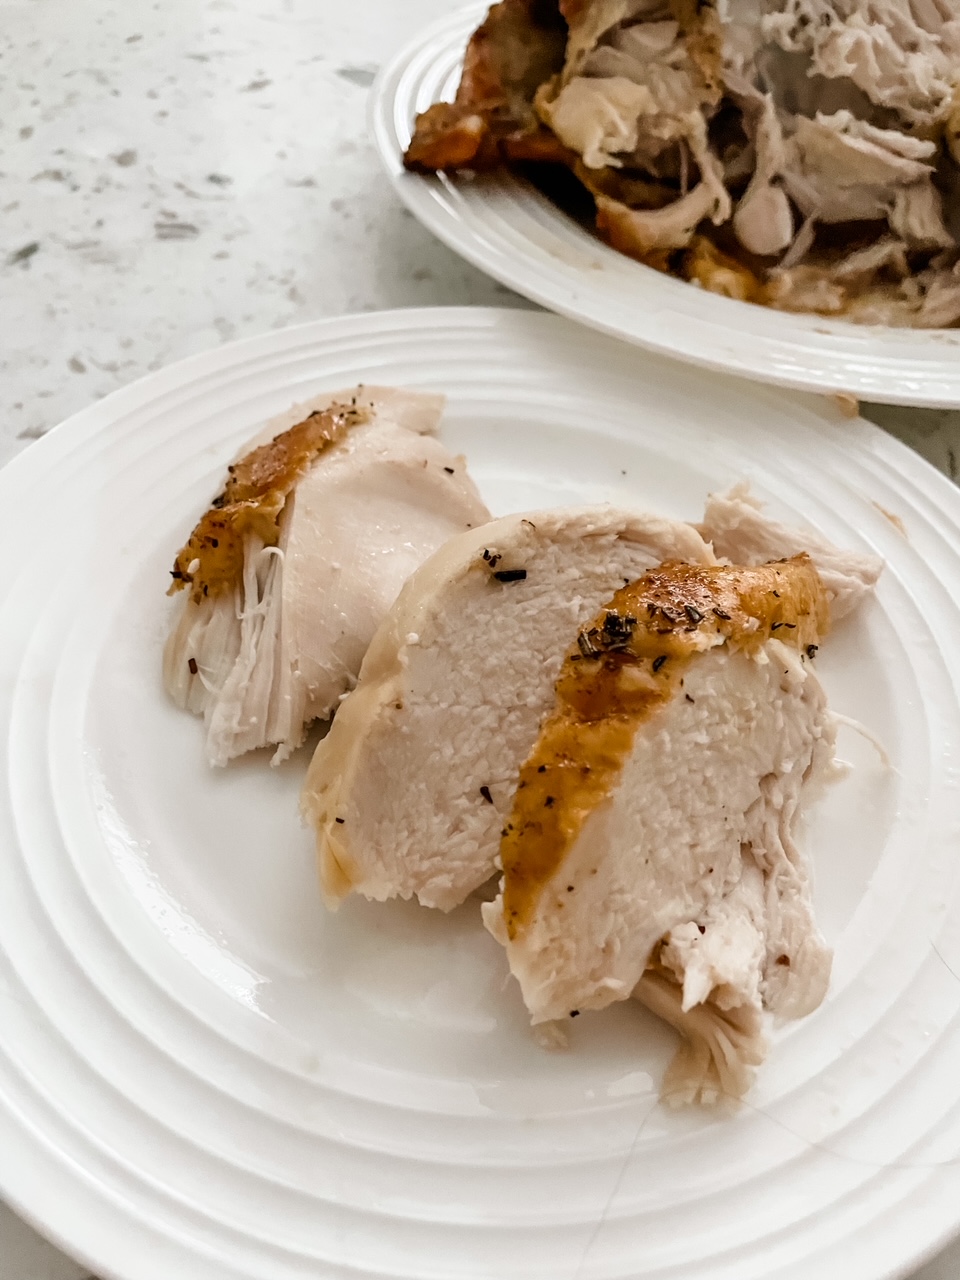 Three slices of the Basic Herb-Roasted Chicken